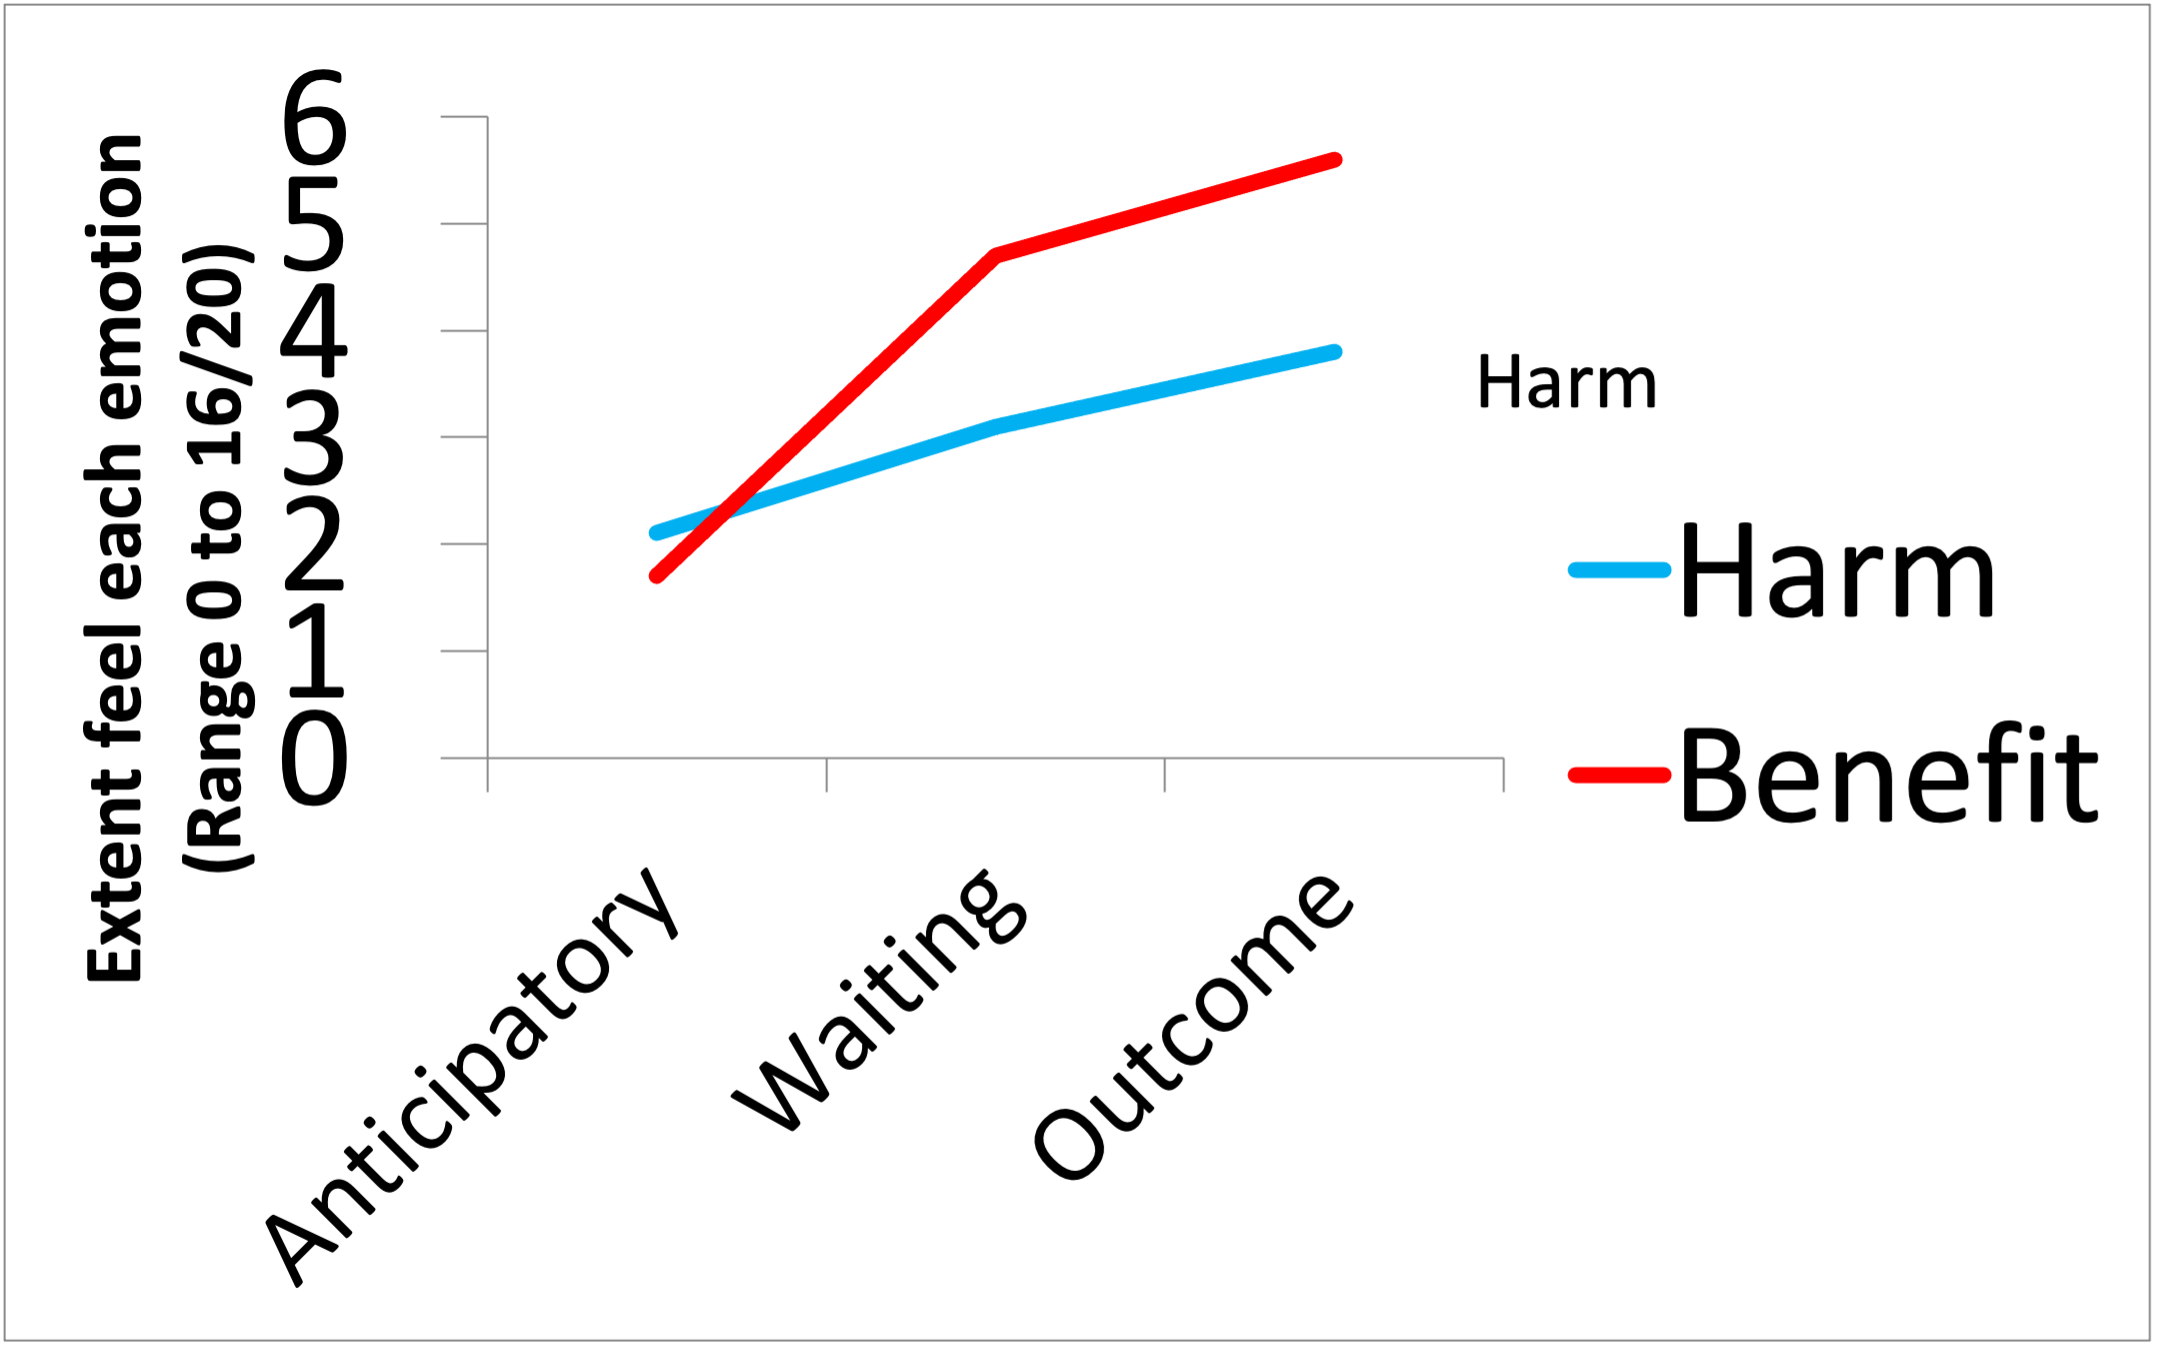 A line graph with two lines plotted. One line for harm (blue), and one line for benefit (red). The x axis elapses over the same 3 labels as the previous line graph: Anticipatory, Waiting, Outcome. The y axis is labeled: Extent feel each emotion (range 0 to 16/20). The y axis starts at 0 and increases in increments of 1 to a maximum of 6.